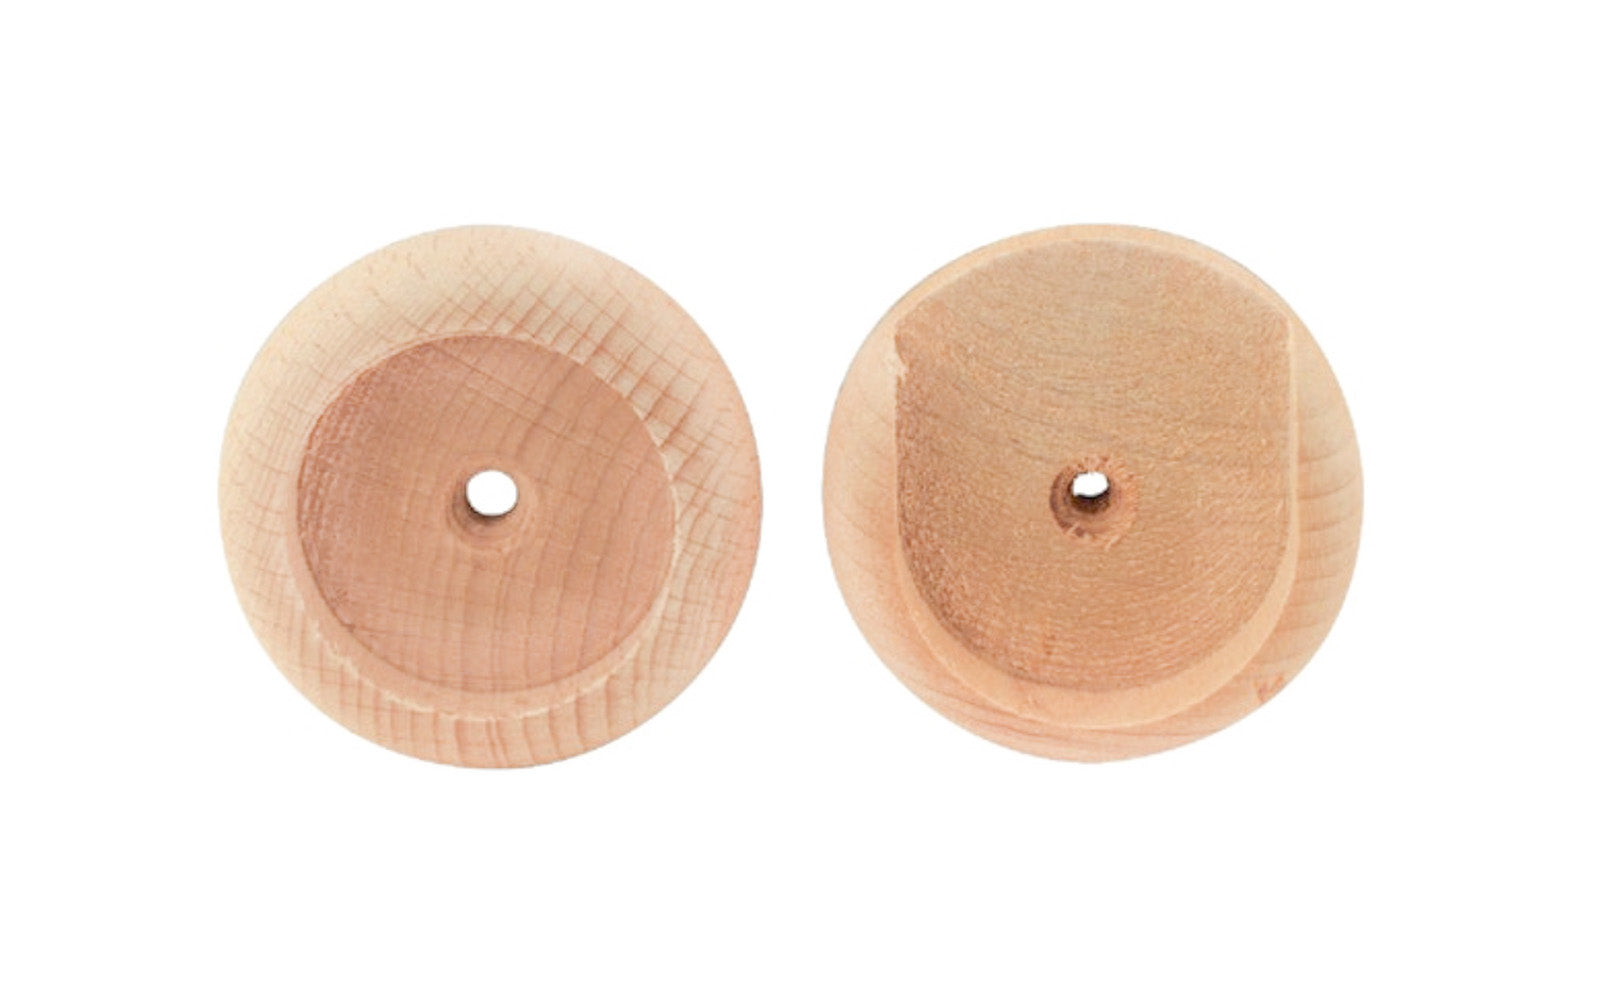 1-3/8" Wooden Closet Rod Sockets are made of hardwood for strength. Use as supporting rod for hanging clothes in closets, wardrobes, & more. Extra deep holes to prevent heavily loaded rods from dropping out. 1 socket is slotted so the rod can be easily put in or be removed. One set in pack, includes two screws.